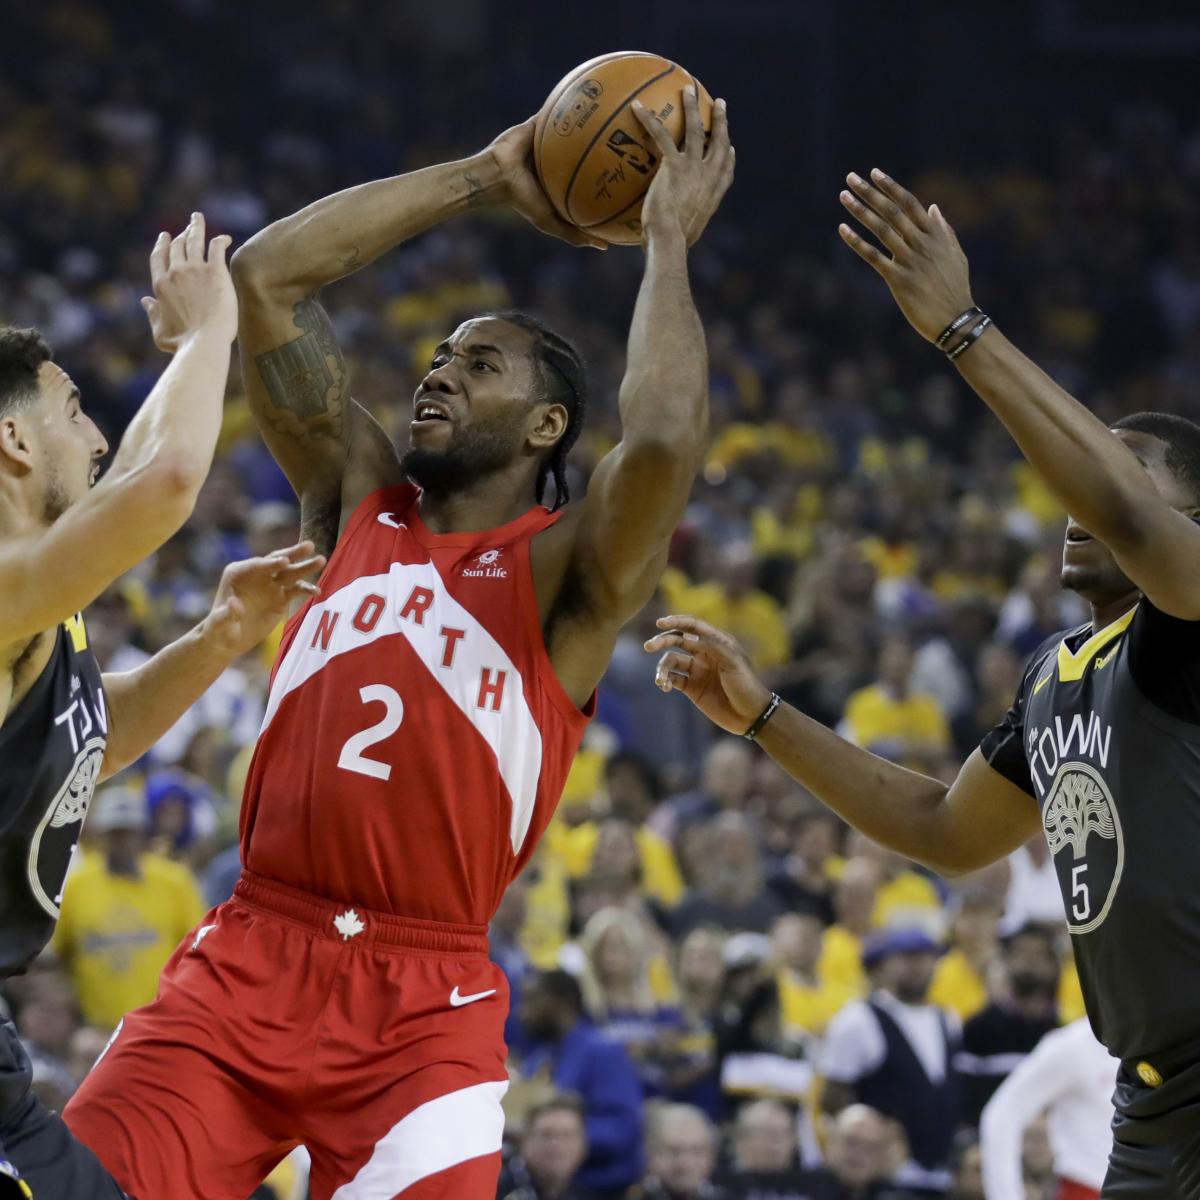 Raptors Vs Warriors Game 5 Tv Schedule Live Stream Guide For 2019 Nba Finals Bleacher Report Latest News Videos And Highlights